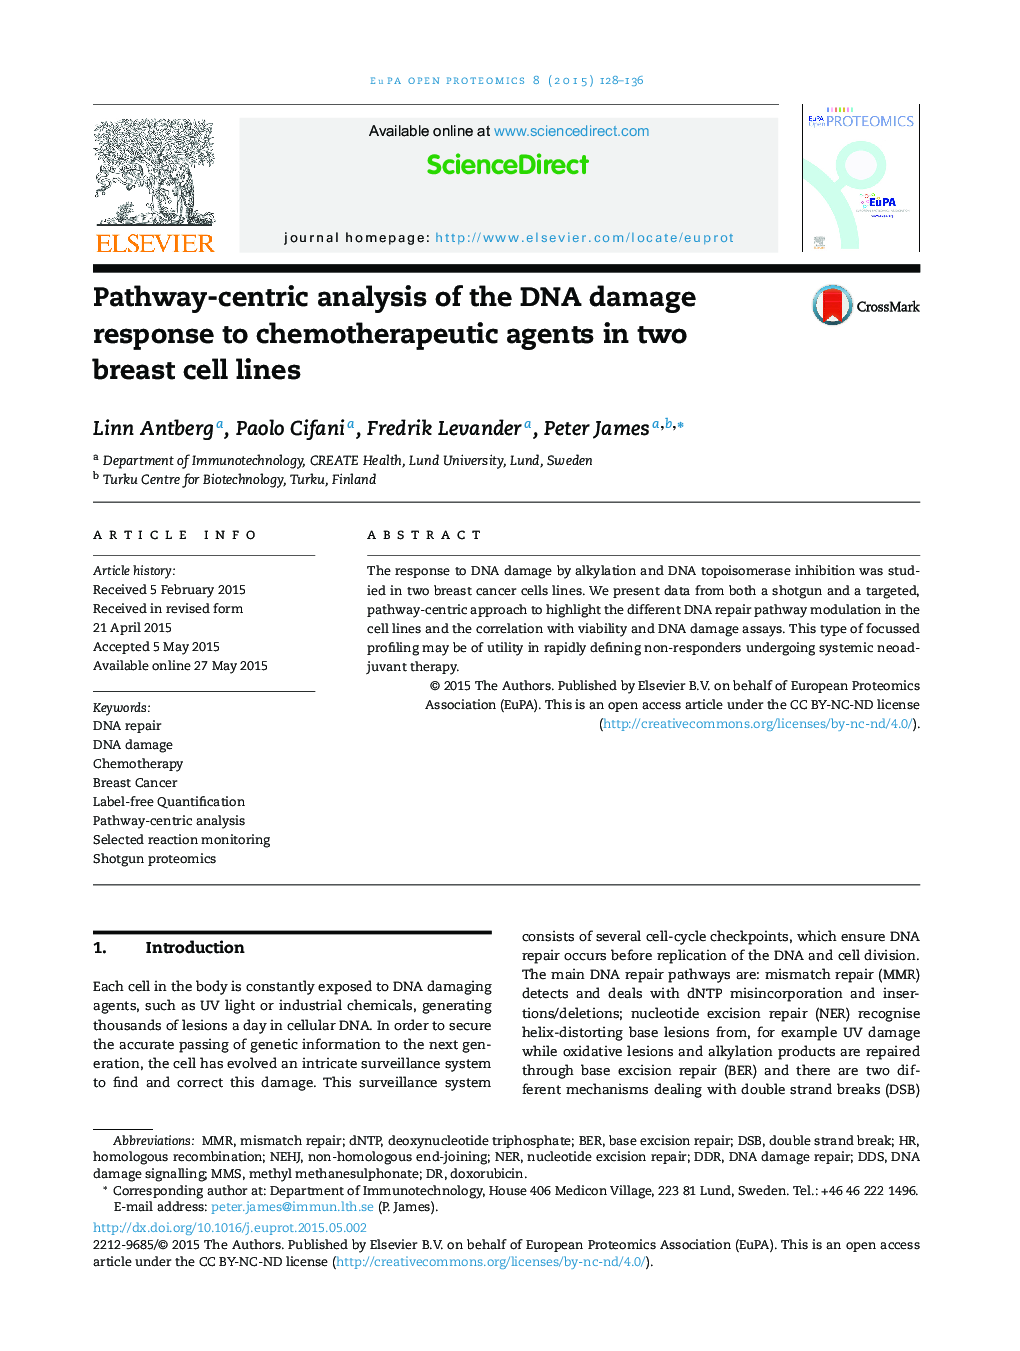 Pathway-centric analysis of the DNA damage response to chemotherapeutic agents in two breast cell lines